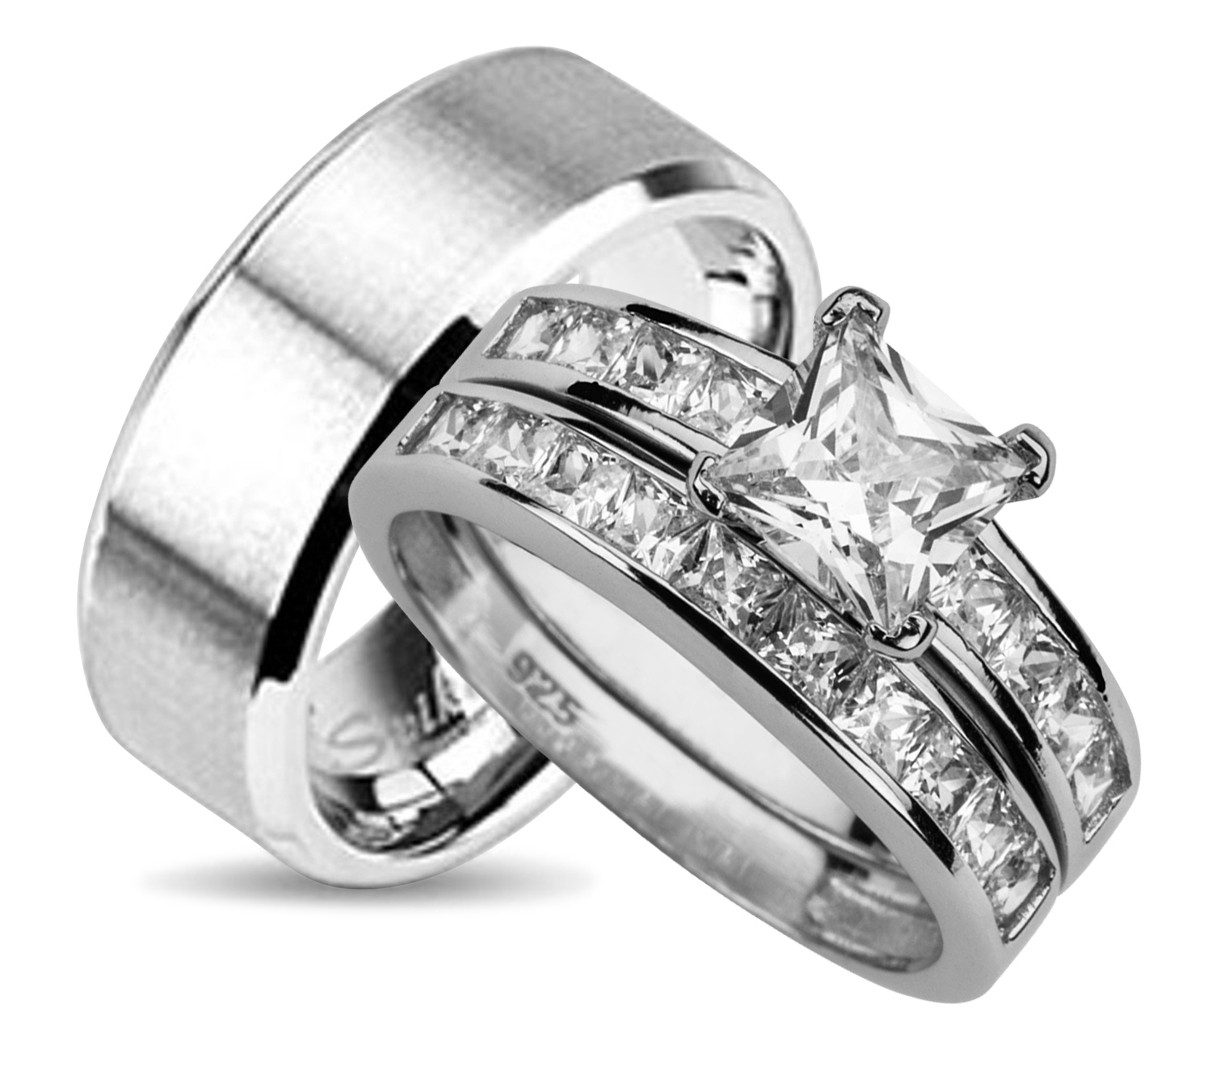 Cheap Wedding Band Sets His And Hers
 LaRaso & Co His and Hers Wedding Ring Set Matching